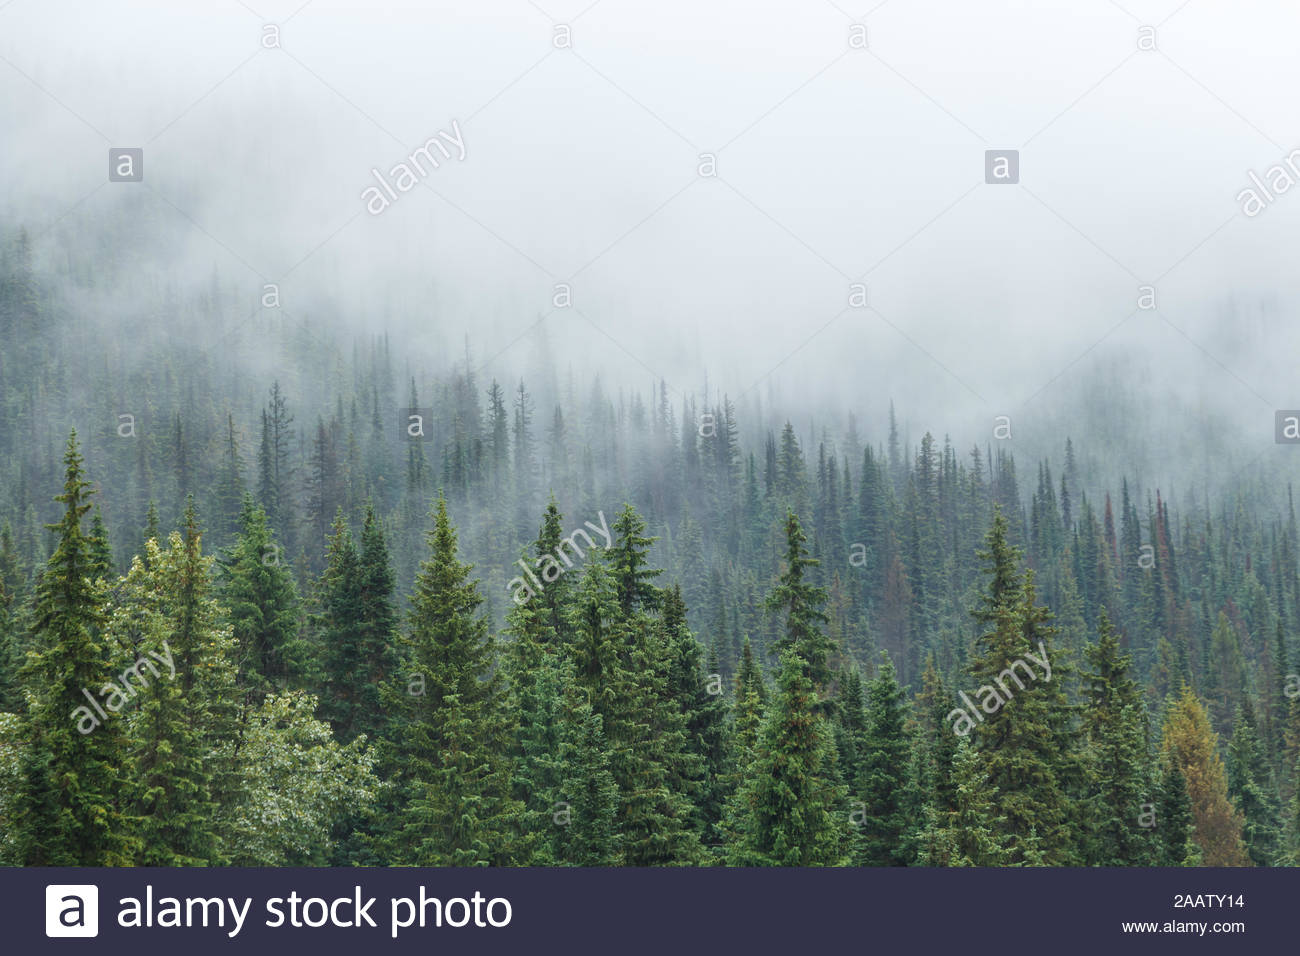 Eerie Background High Resolution Stock Photography and Images